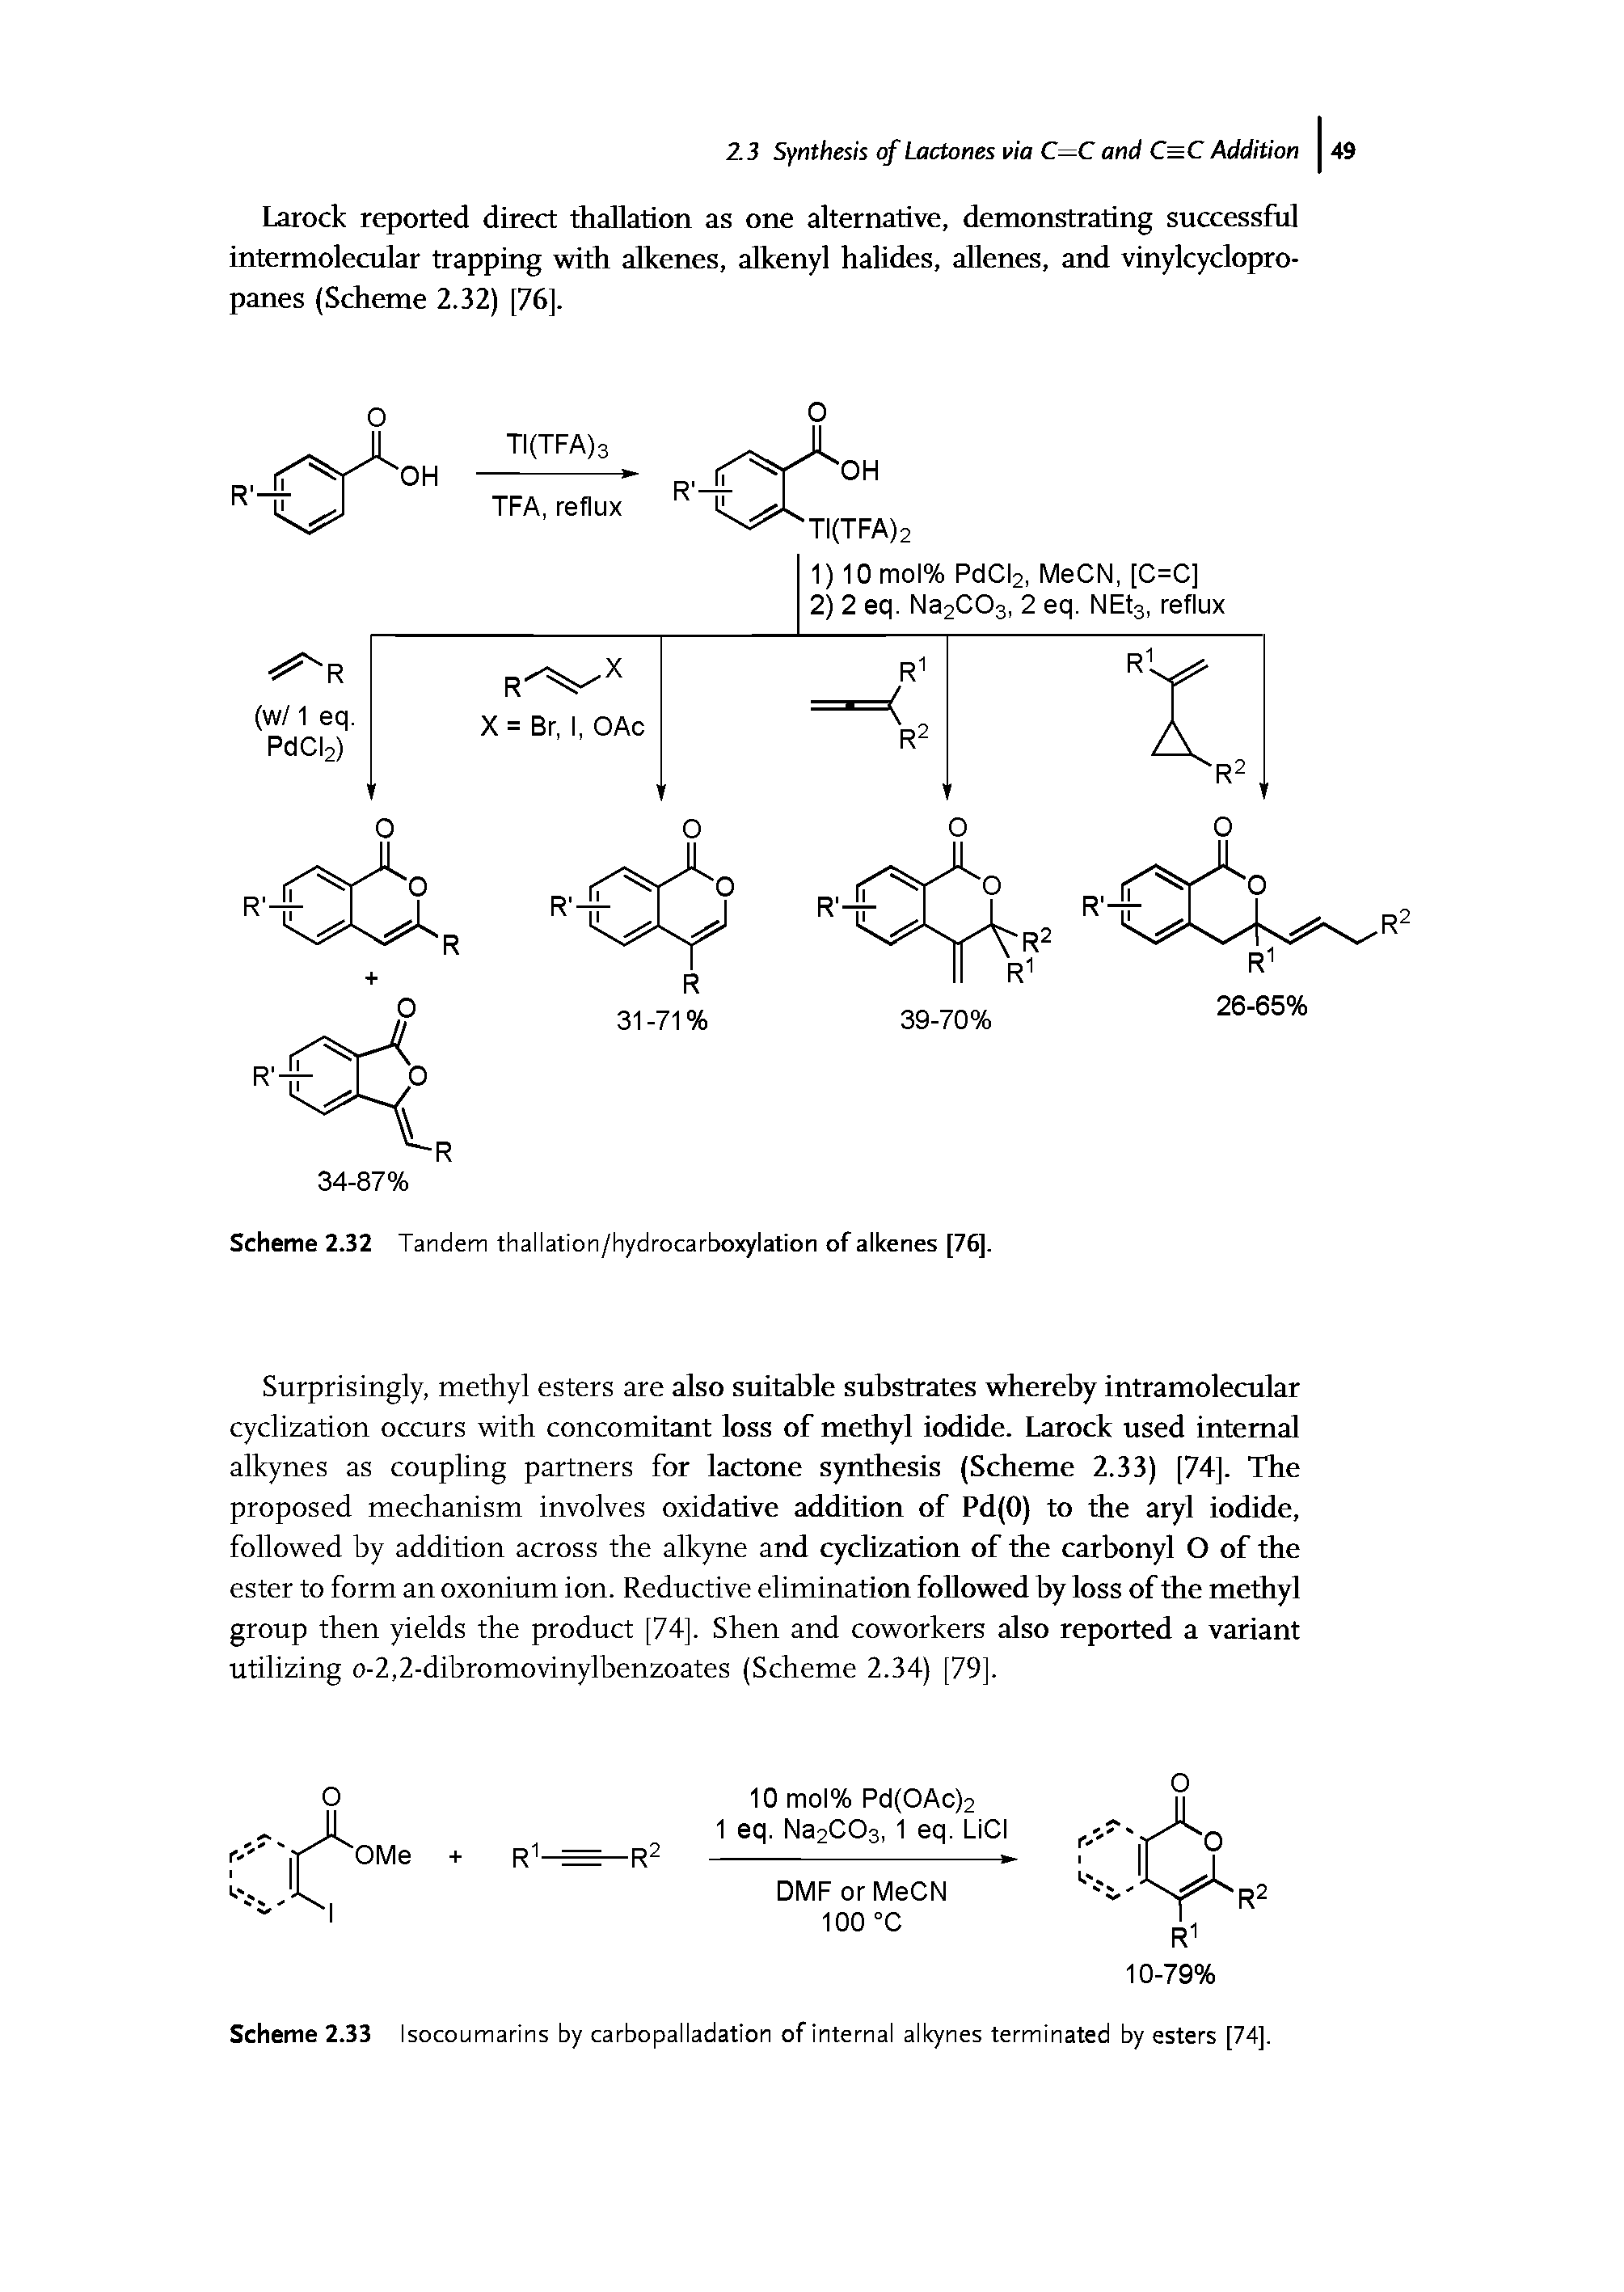 Scheme 2.33 Isocoumarins by carbopalladation of internal alkynes terminated by esters [74].